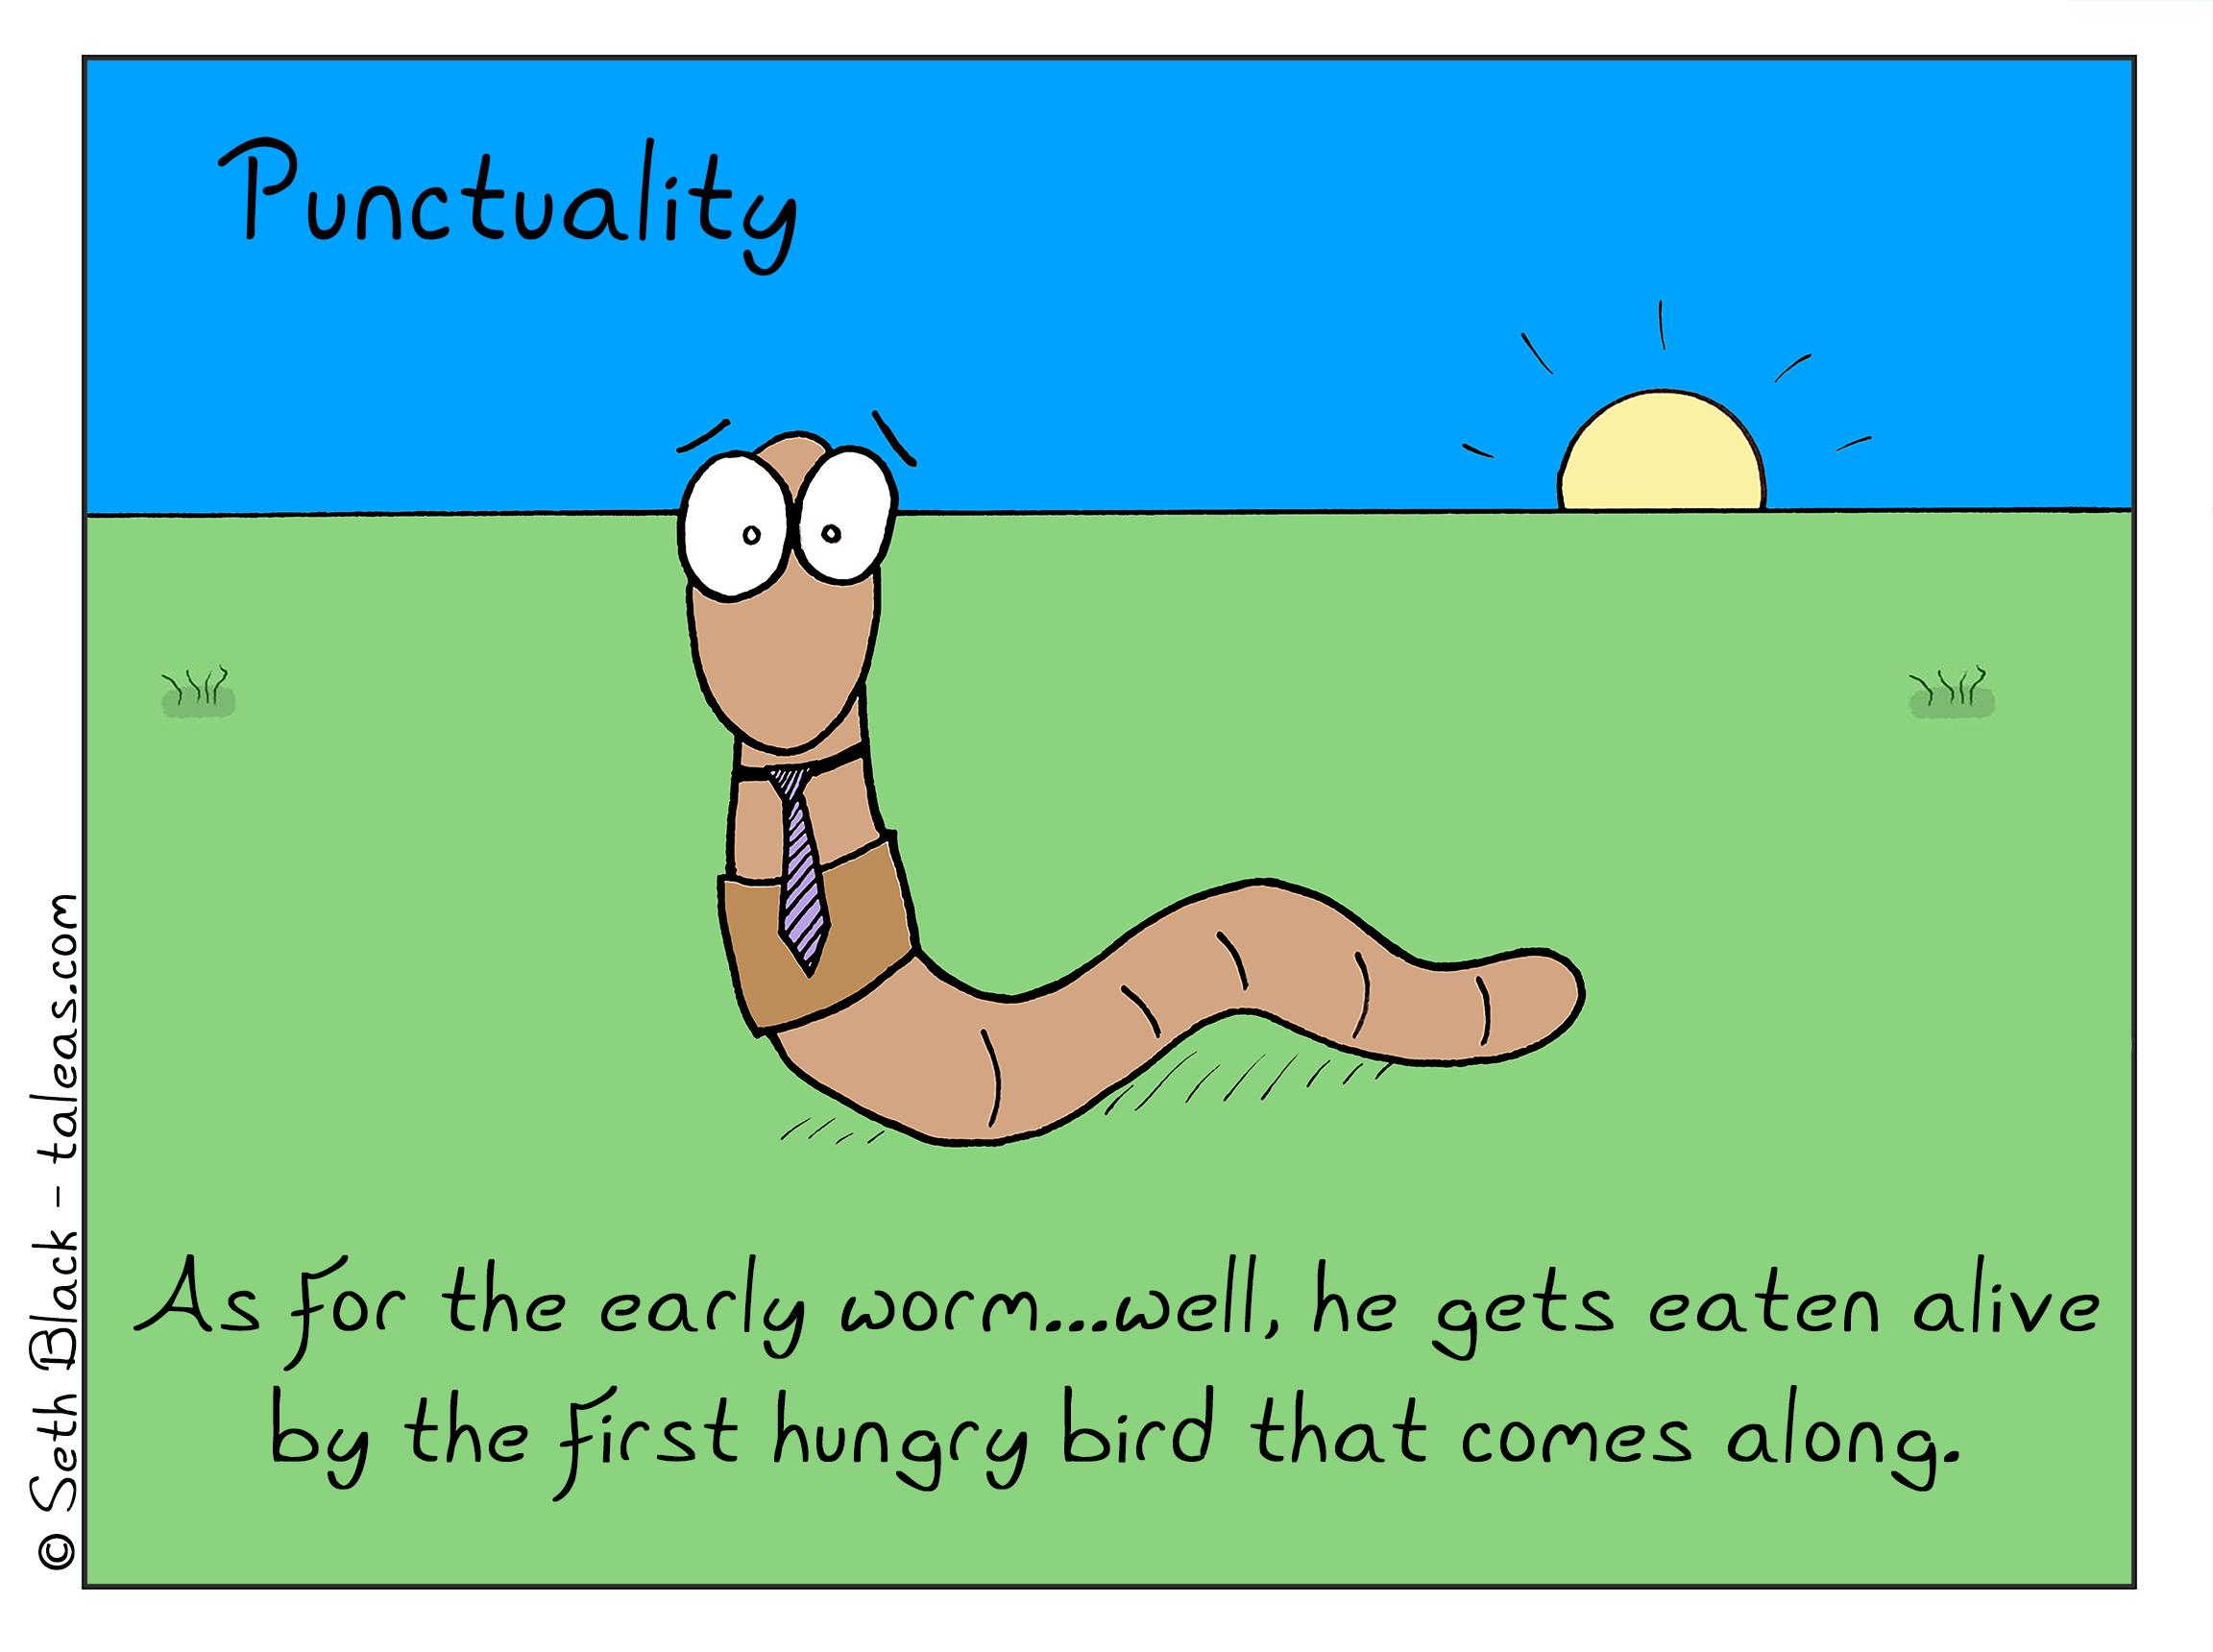 A poster with a worm wearing a necktie with the sun rising in the distance. "Punctuality: as for the early worm - well, he gets eaten alive by the first hungry bird that comes along."